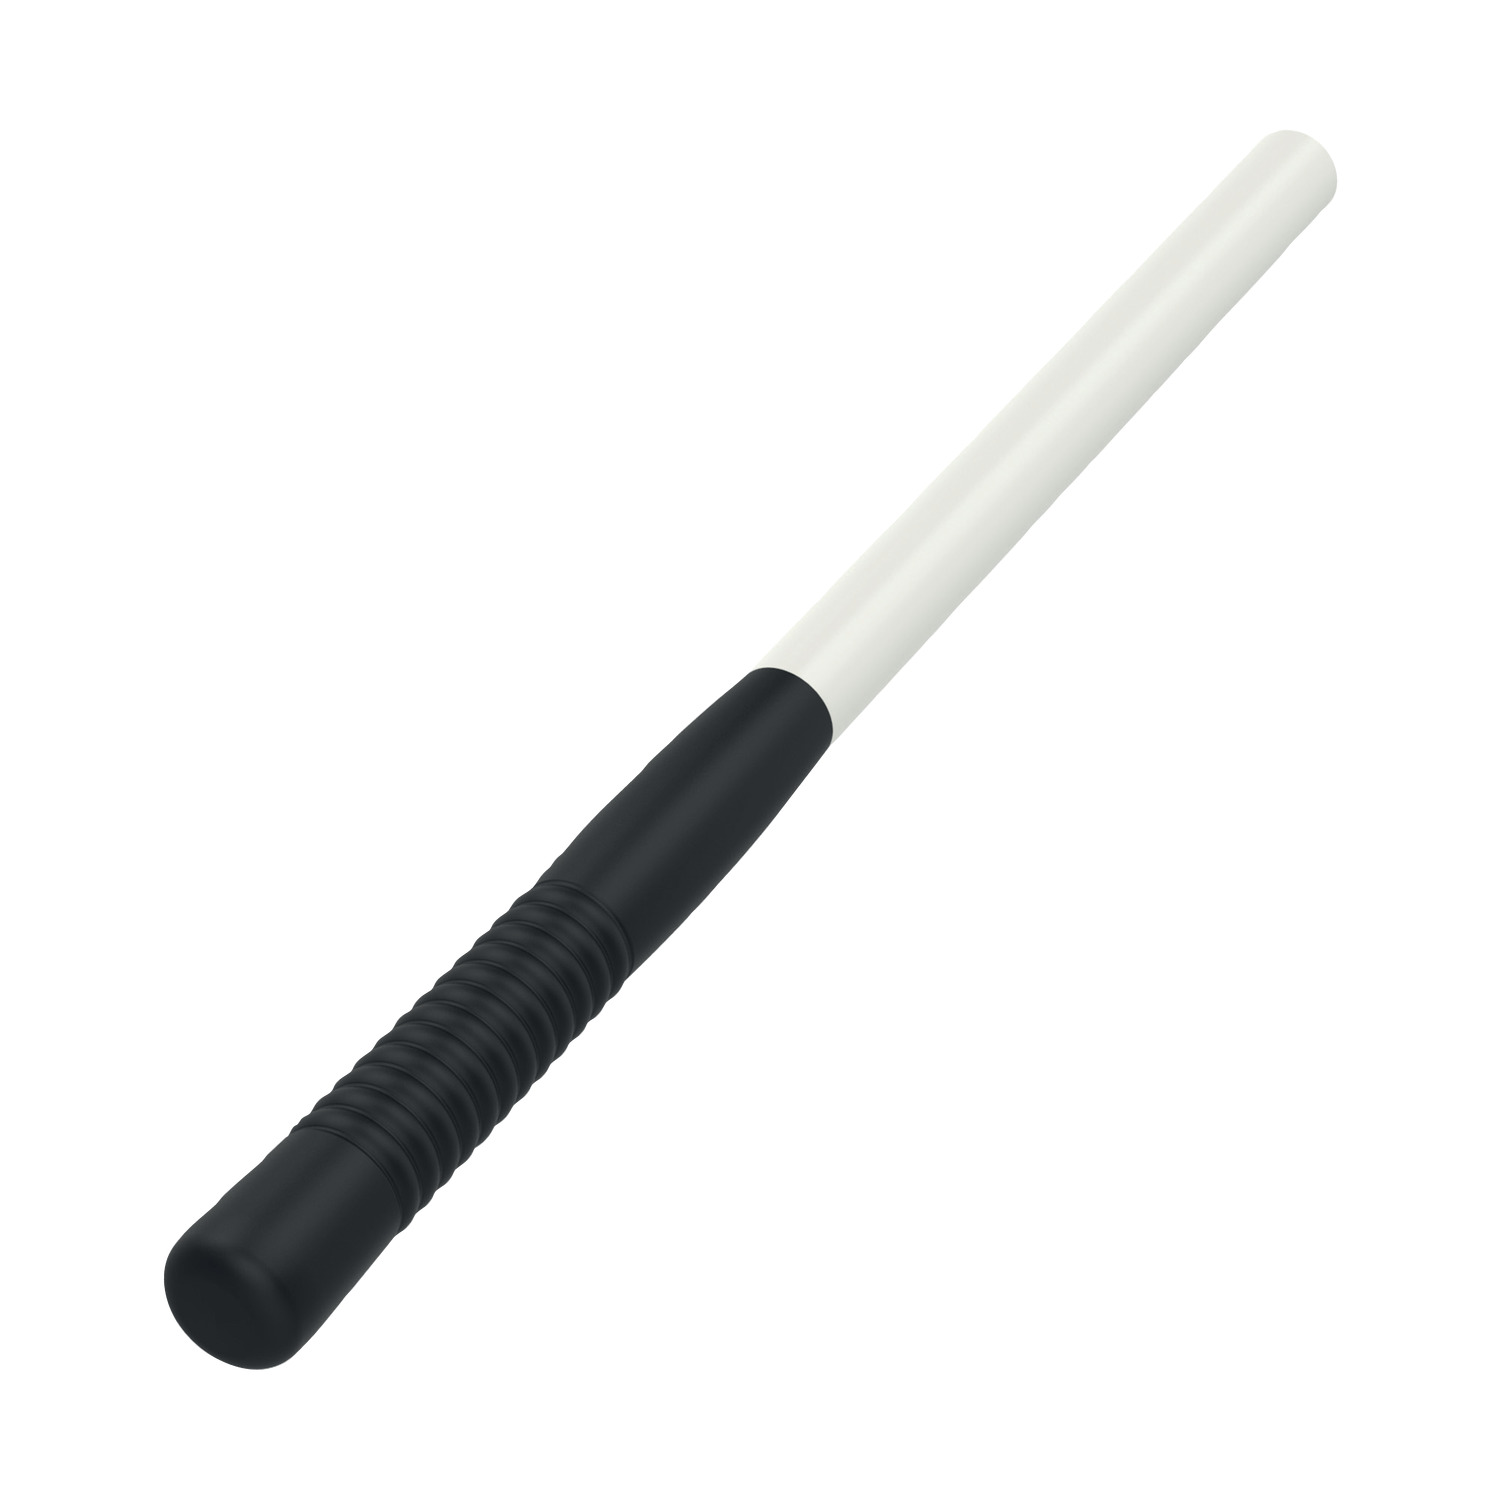 98223 - Handle - for Simplex Sledge Hammers